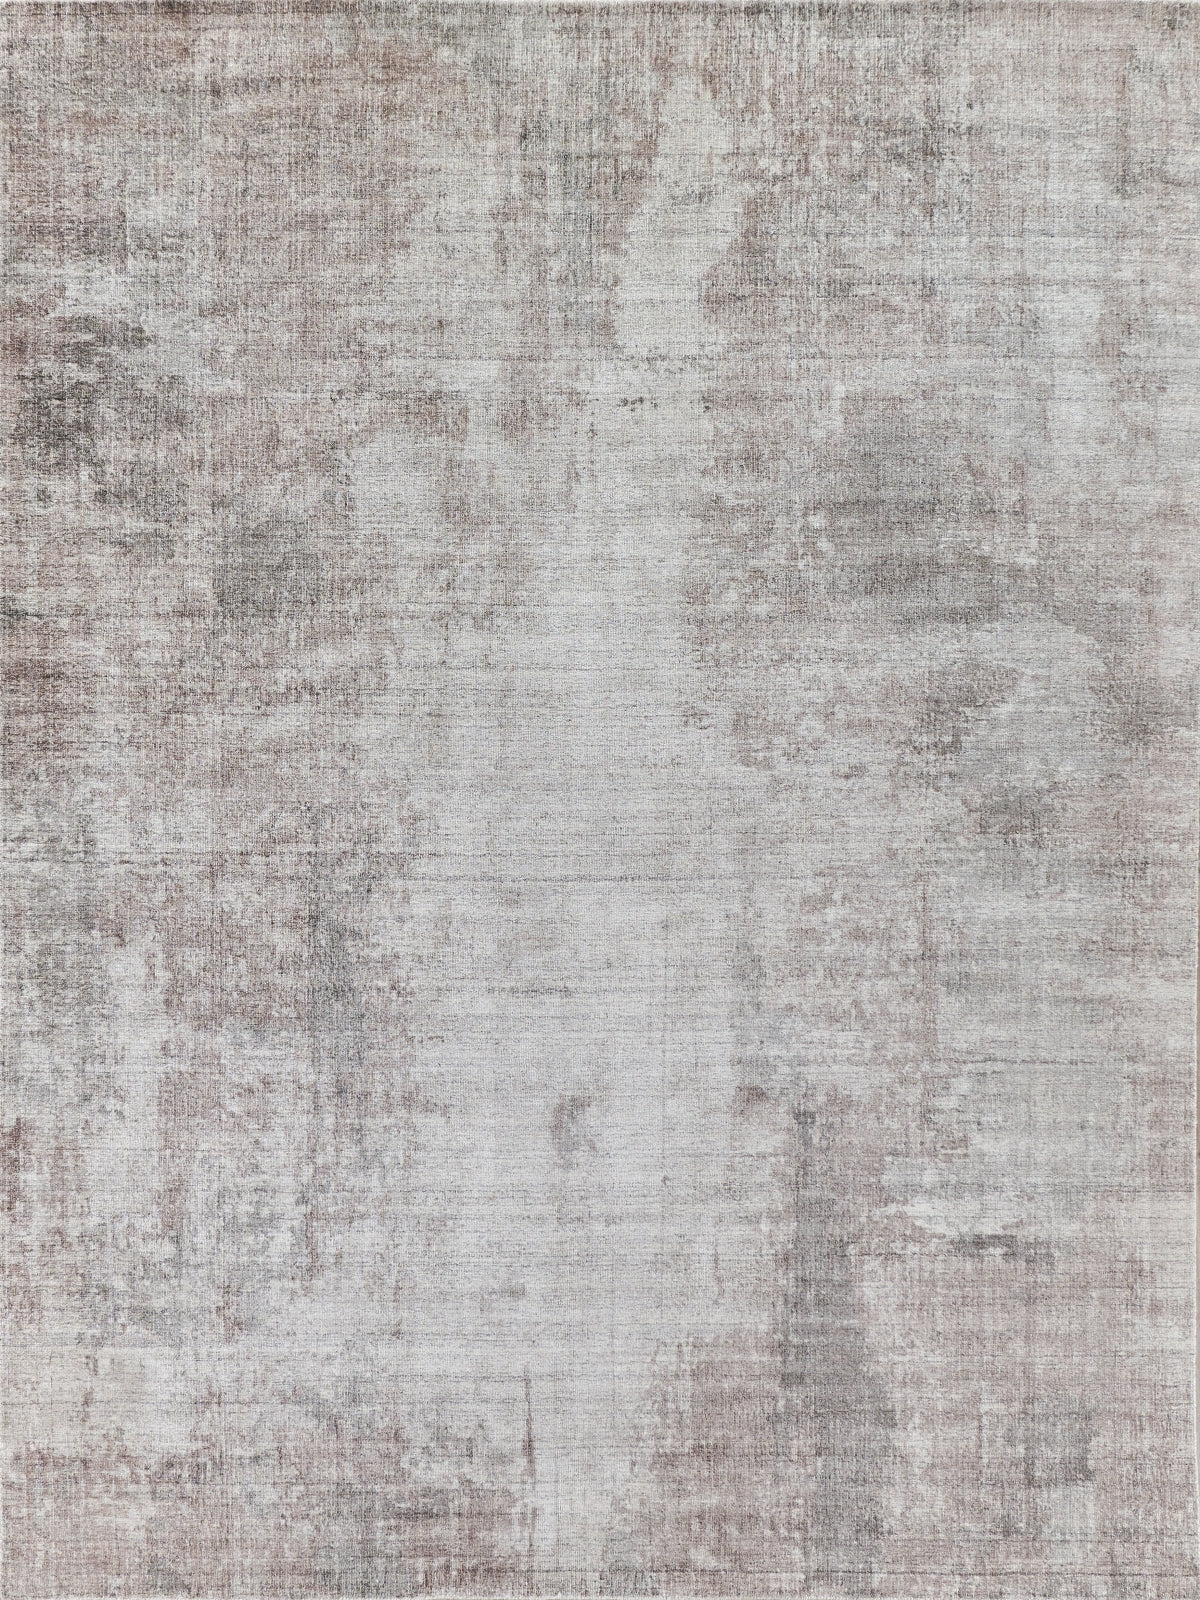 Exquisite Rugs Stone Wash Gazni 4970 Silver/Taupe Area Rug